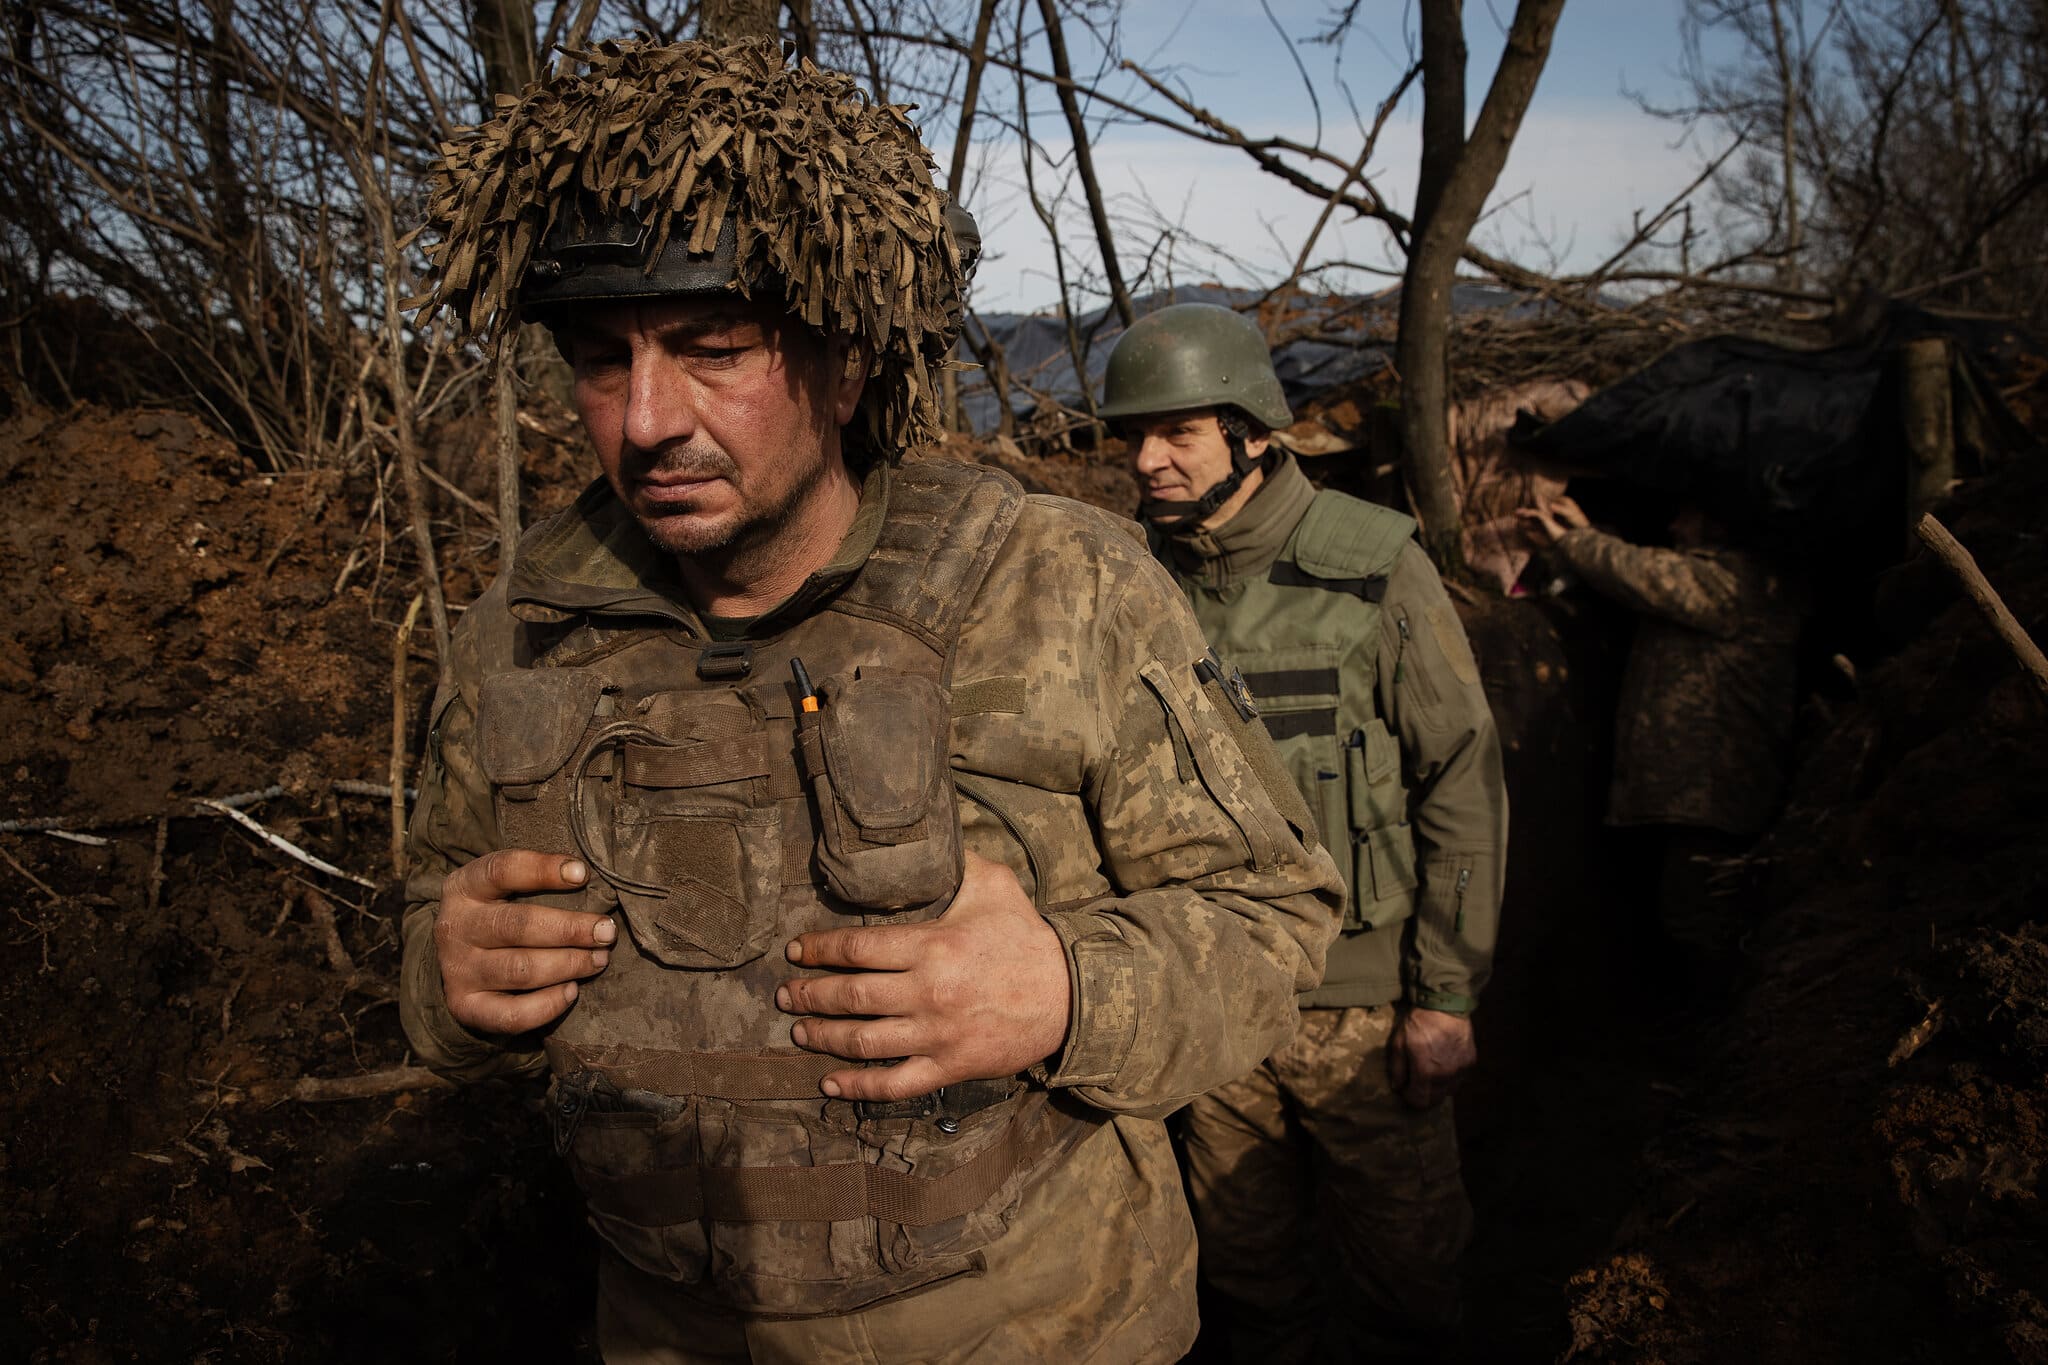 Avdiivka becomes Russia's largest occupation in Ukraine (Credits: The NY Times)